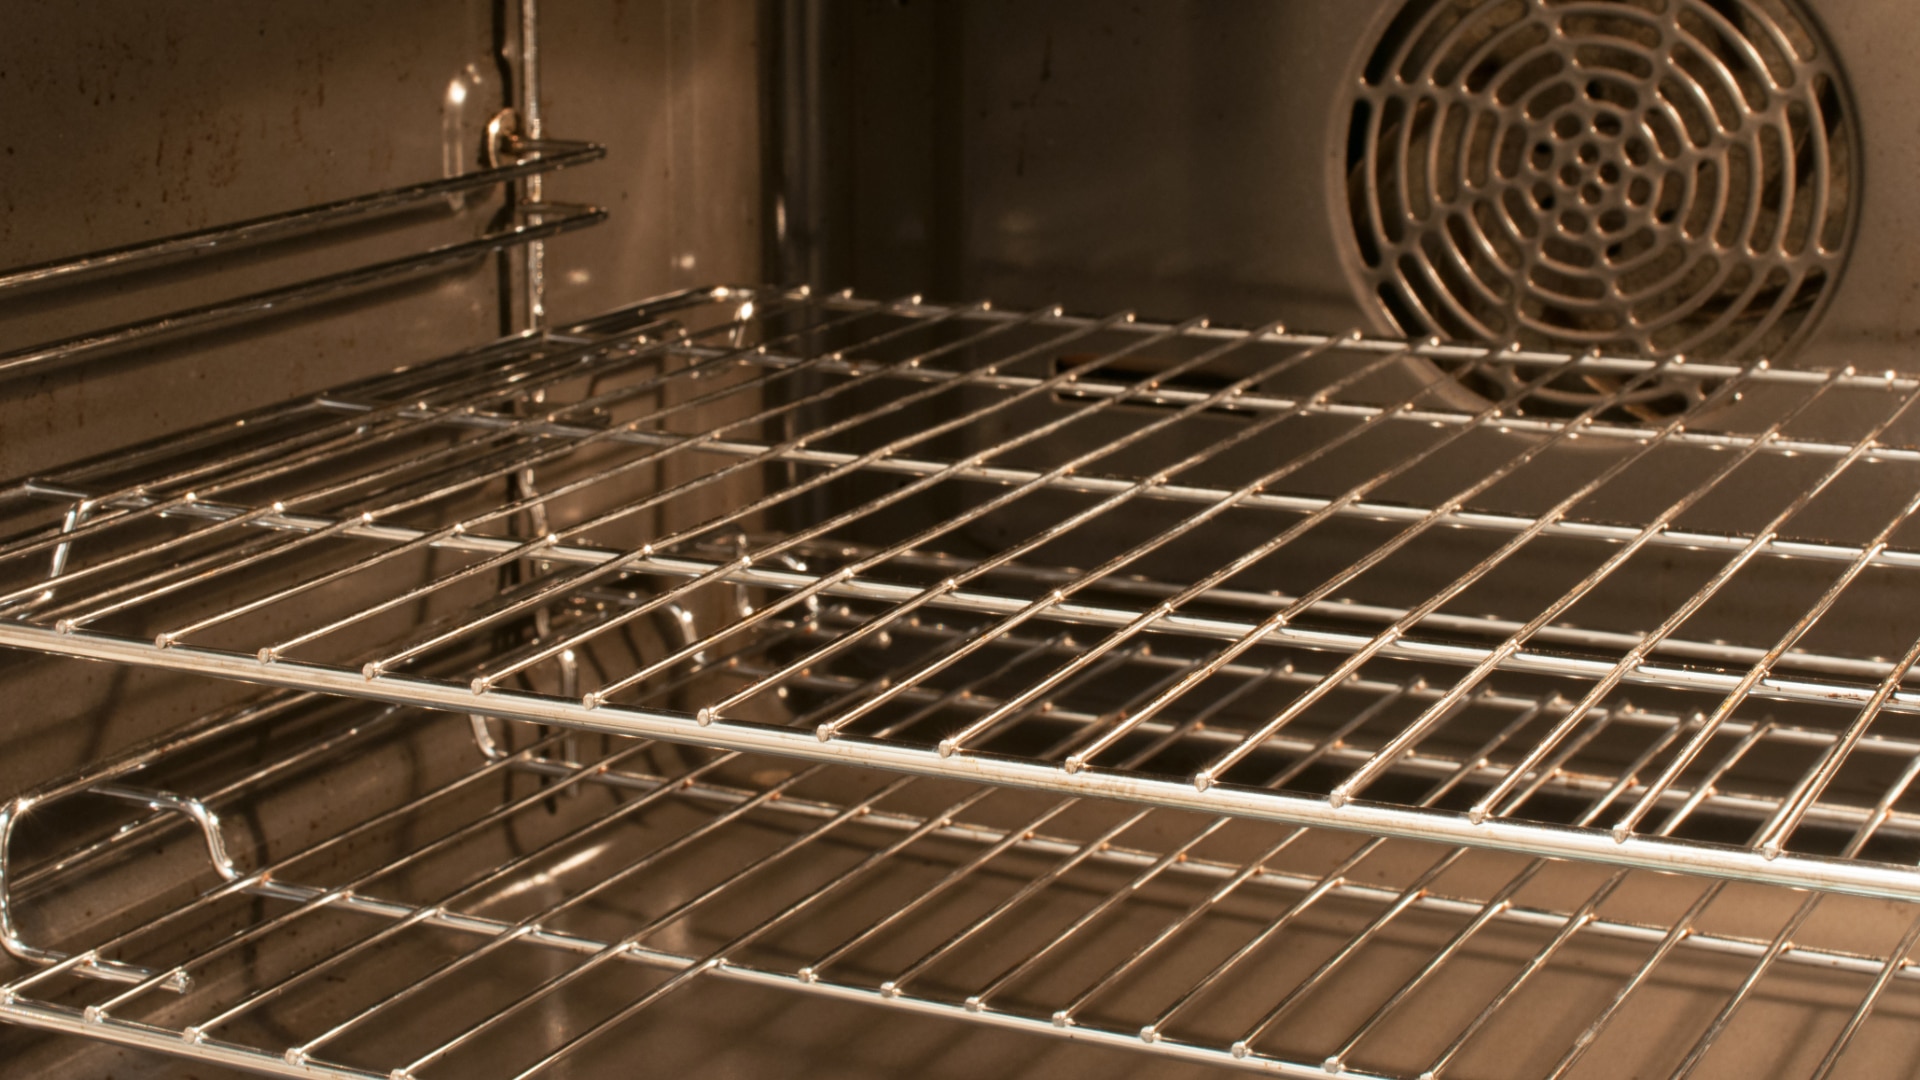 Featured image for “Frigidaire Self-Cleaning Oven Not Working: What You Can Do”